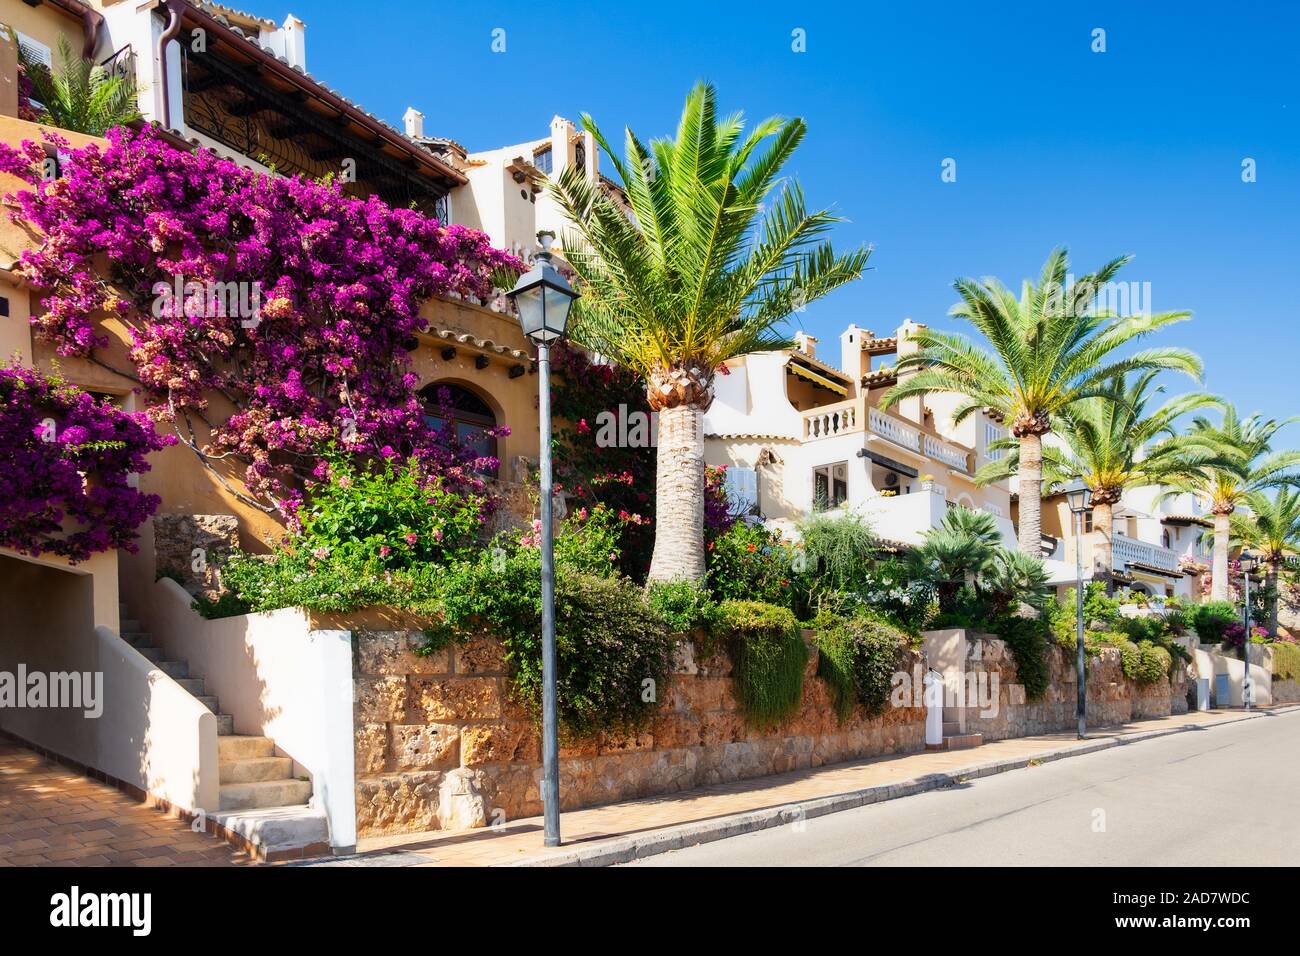 Mediterranean architecture at the idyllic small town of Cala Fornells Stock Photo